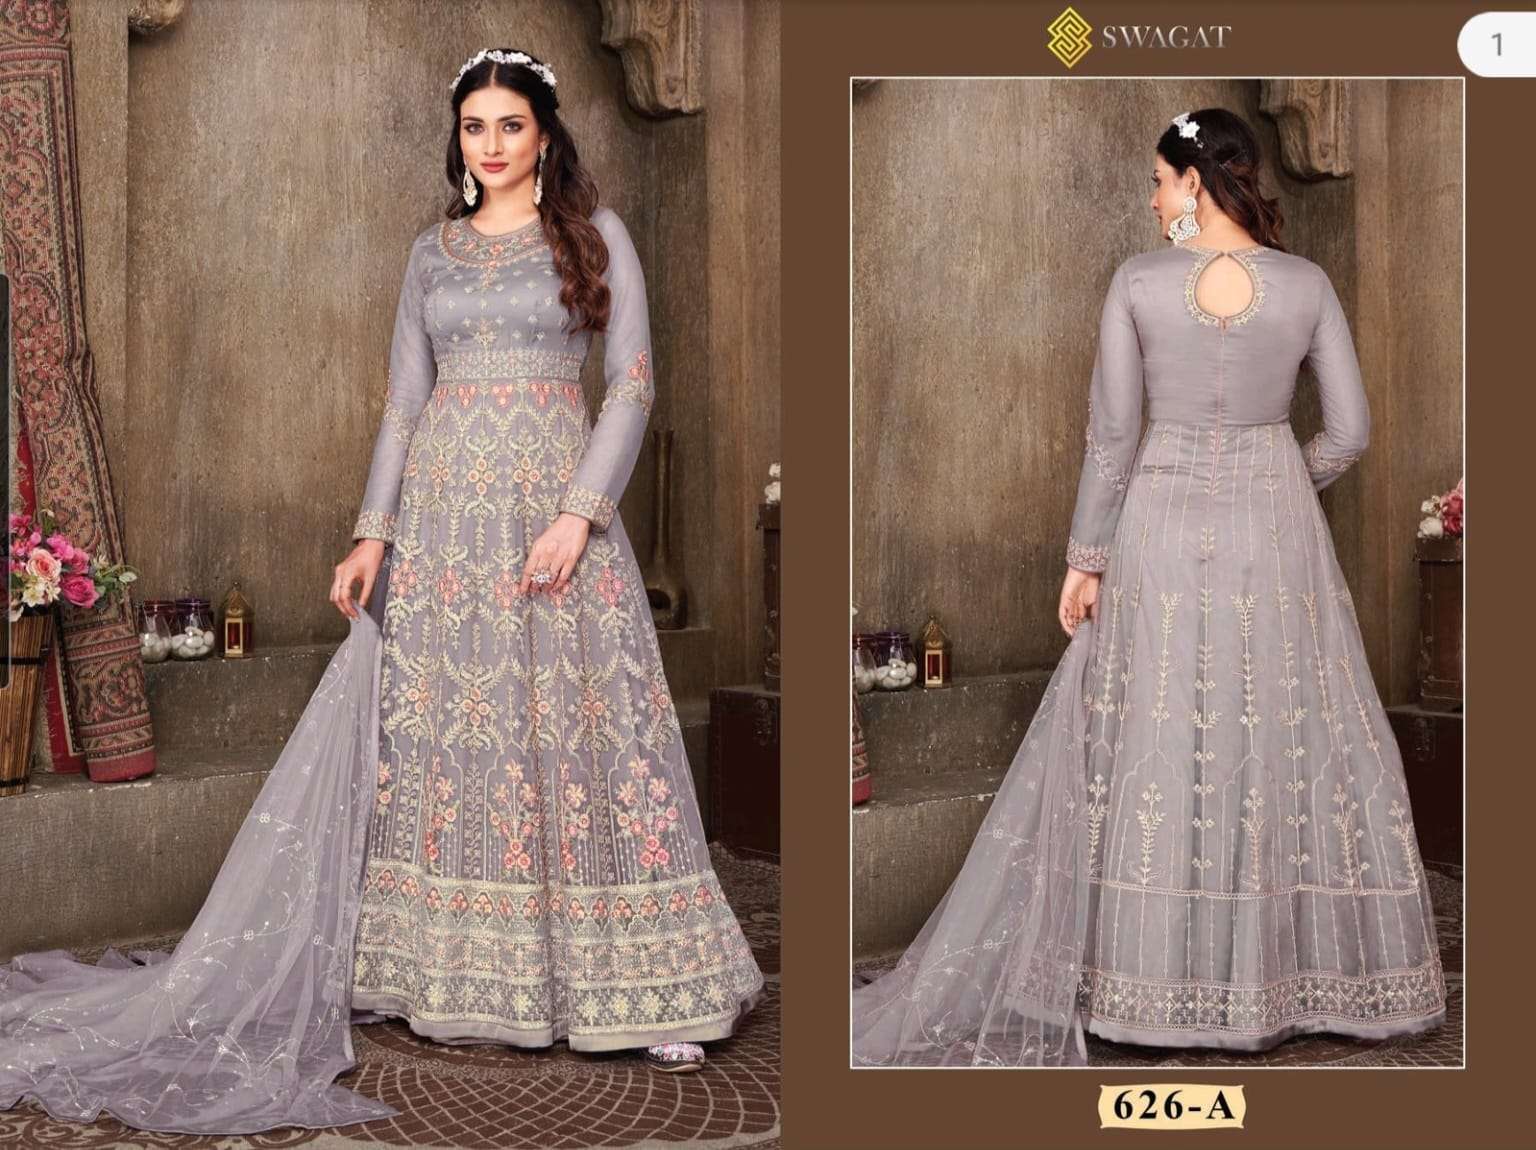 Swagat 626 A Partywear Anarkali Dress Online Collection